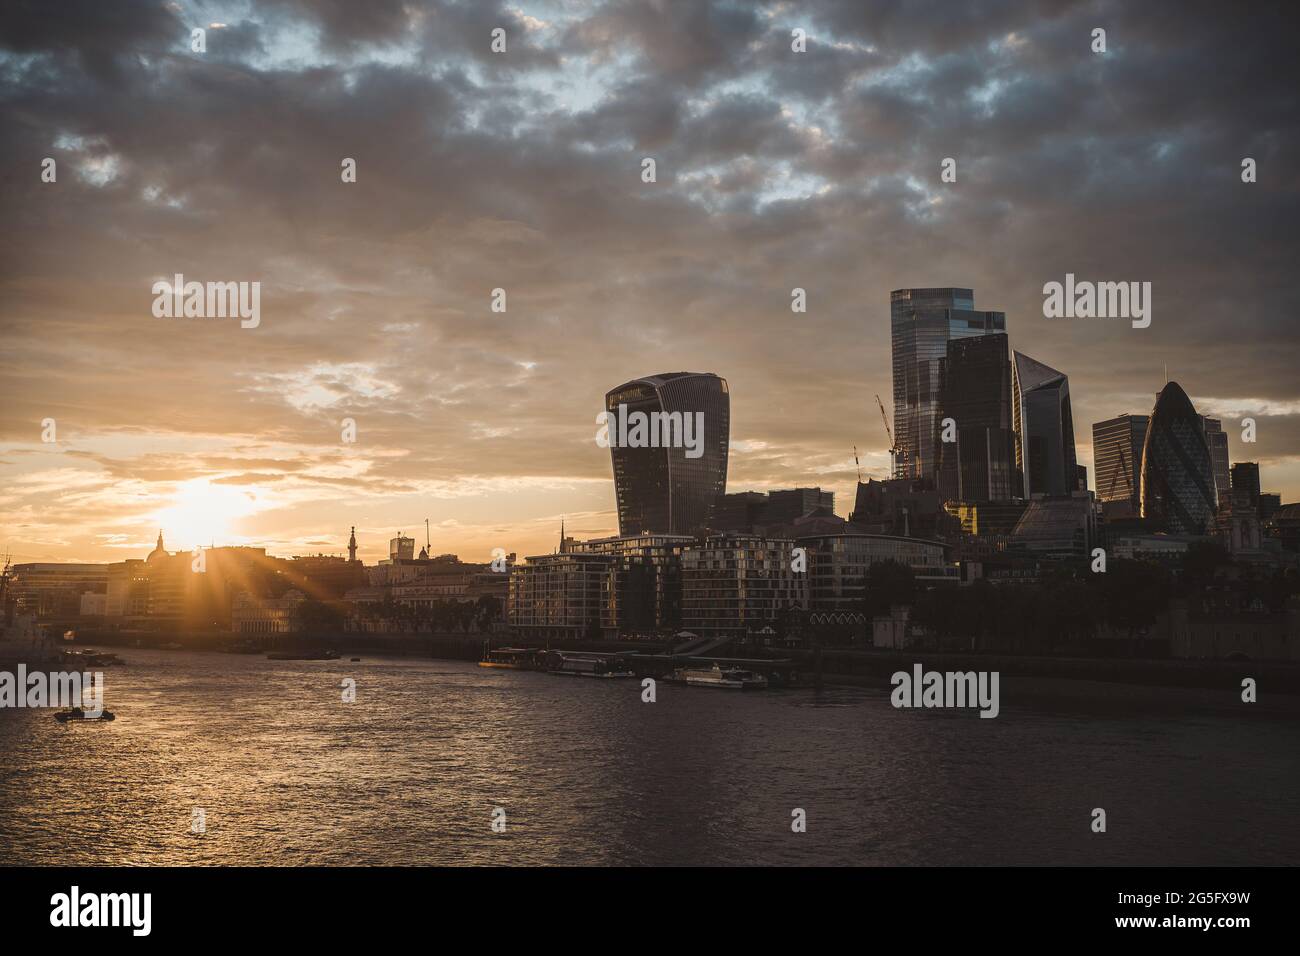 Thames River Embankment, London | UK - 2021.06.26: The view of the CIty Business District from the thames river on beautiful sunset evening Stock Photo